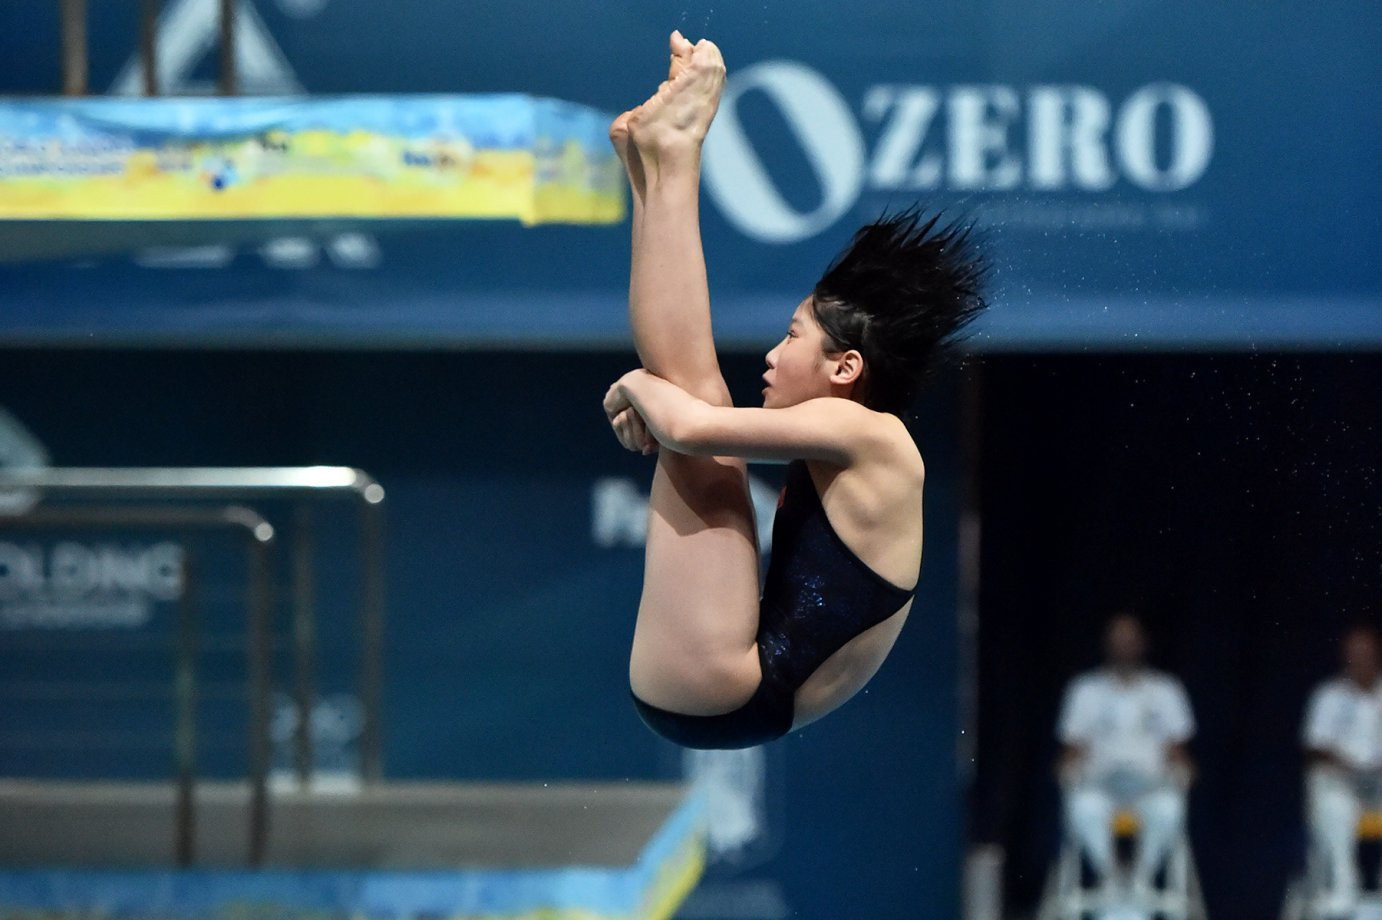 Lai Shiyun secured victory in the 3m springboard for China on the penultimate day of the FINA World Junior Diving Championships in Kyiv taking her country's overall total of gold medals to 12 ©FINA